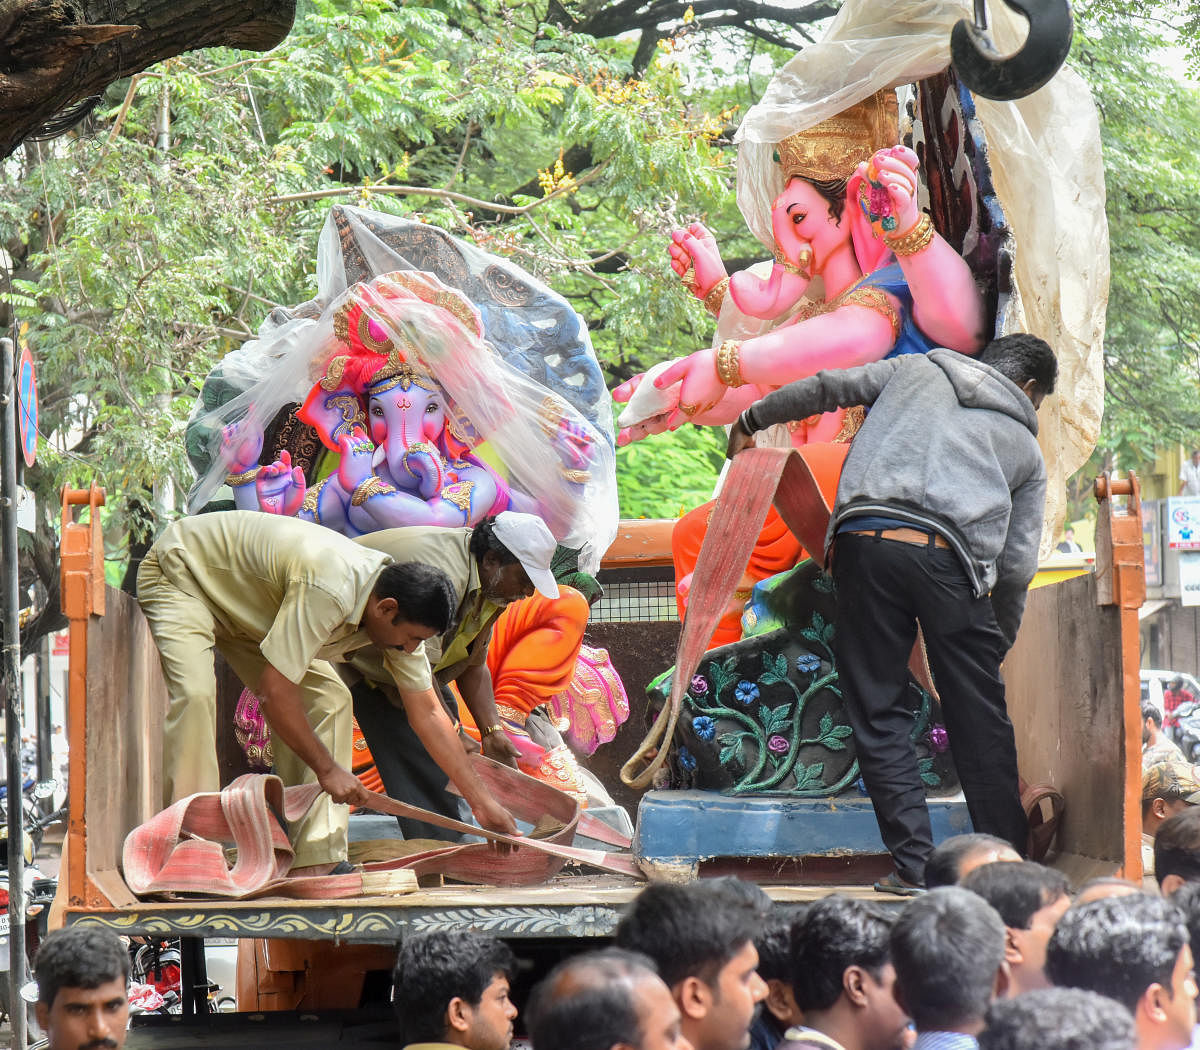 Palike workers seize Ganesha idols made of PoP on Wednesday. DH PHOTO/Anup R Thippeswamy